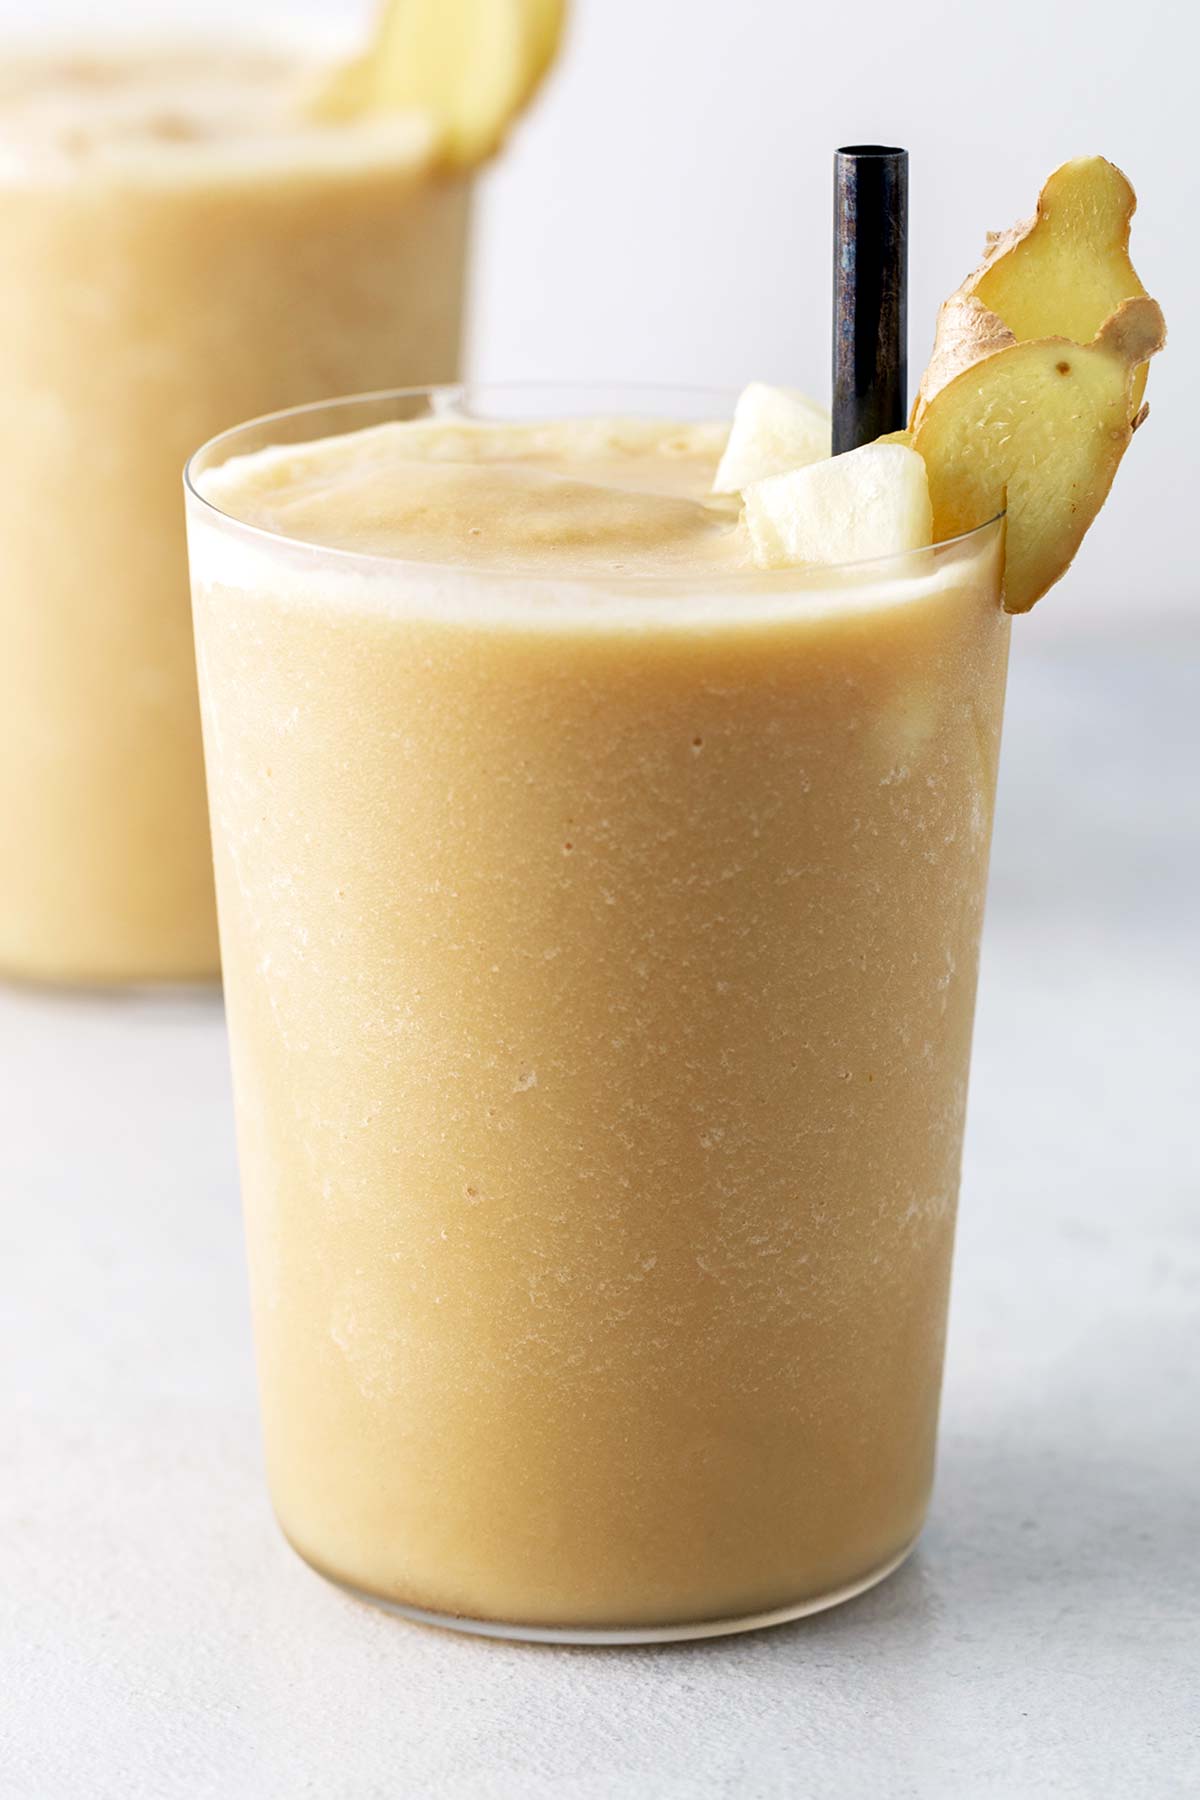 Pineapple ginger smoothie in a glass.